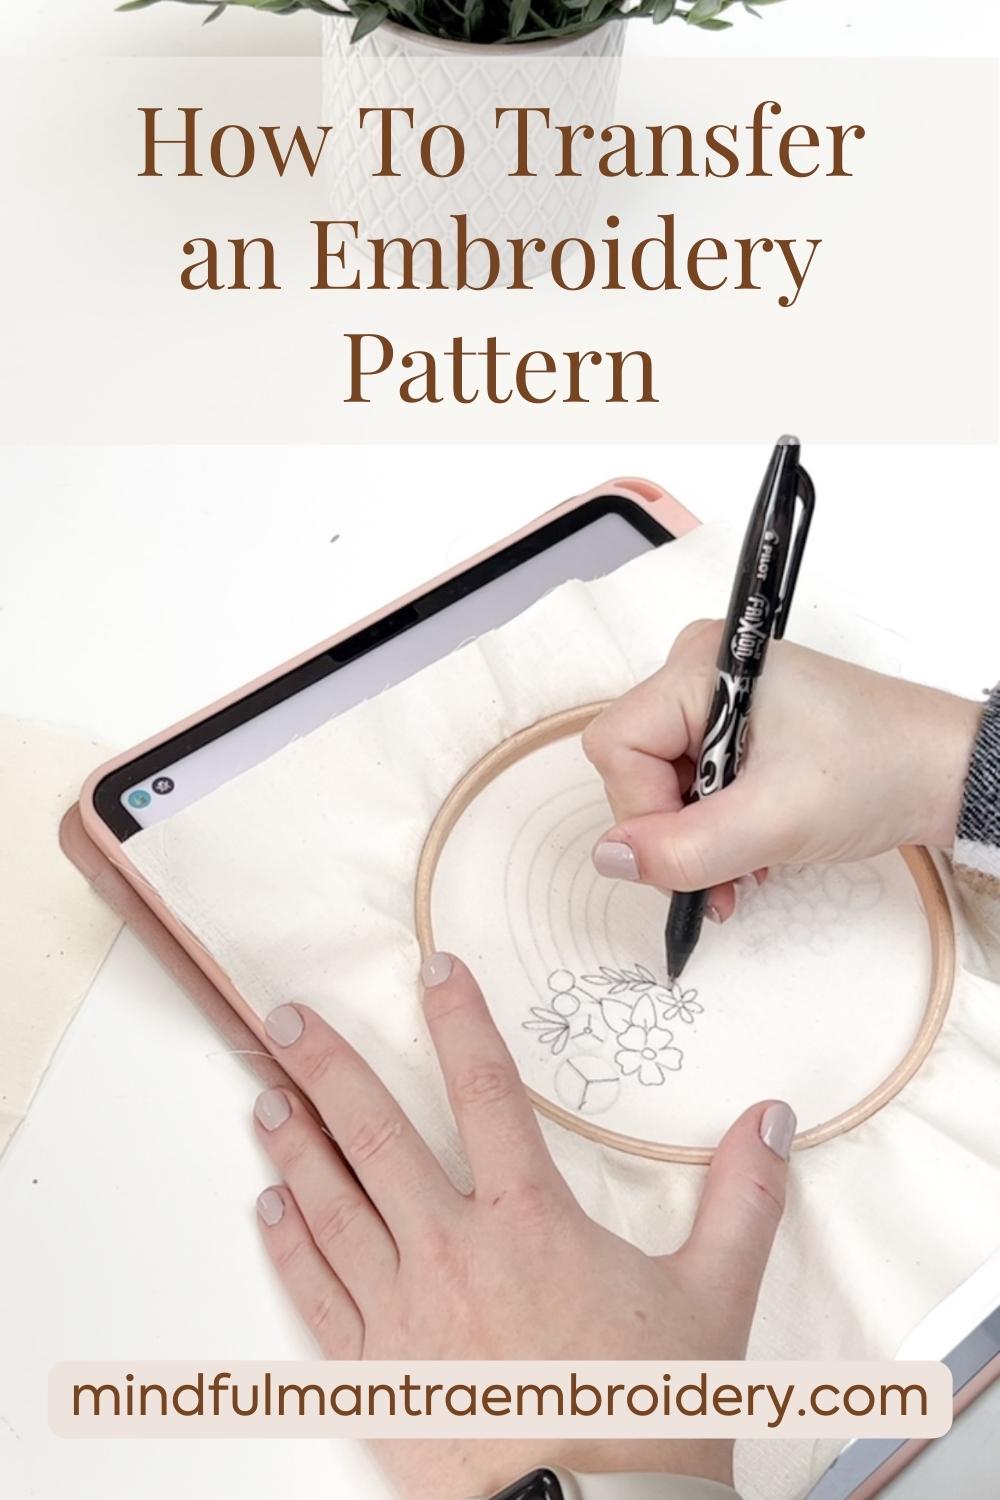 https://mindfulmantraembroidery.com/cdn/shop/articles/Mindful_Mantra_Embroidery_-_How_to_Transfer_an_Emboidery_Pattern_1200x1800.jpg?v=1682582940